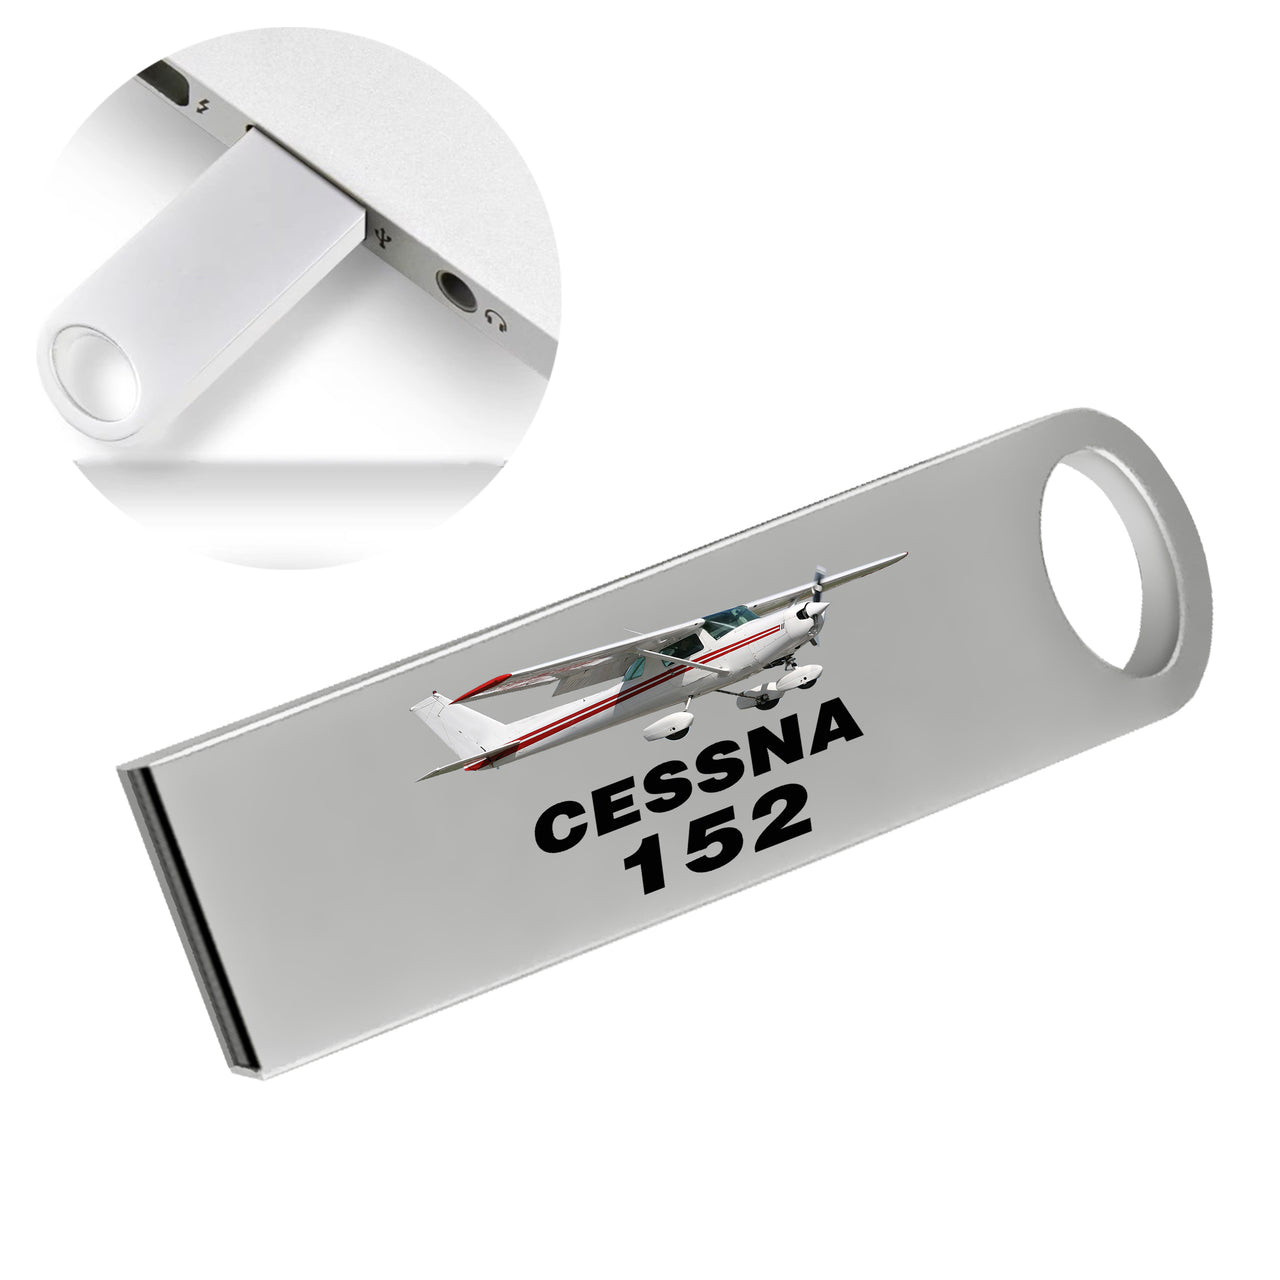 The Cessna 152 Designed Waterproof USB Devices